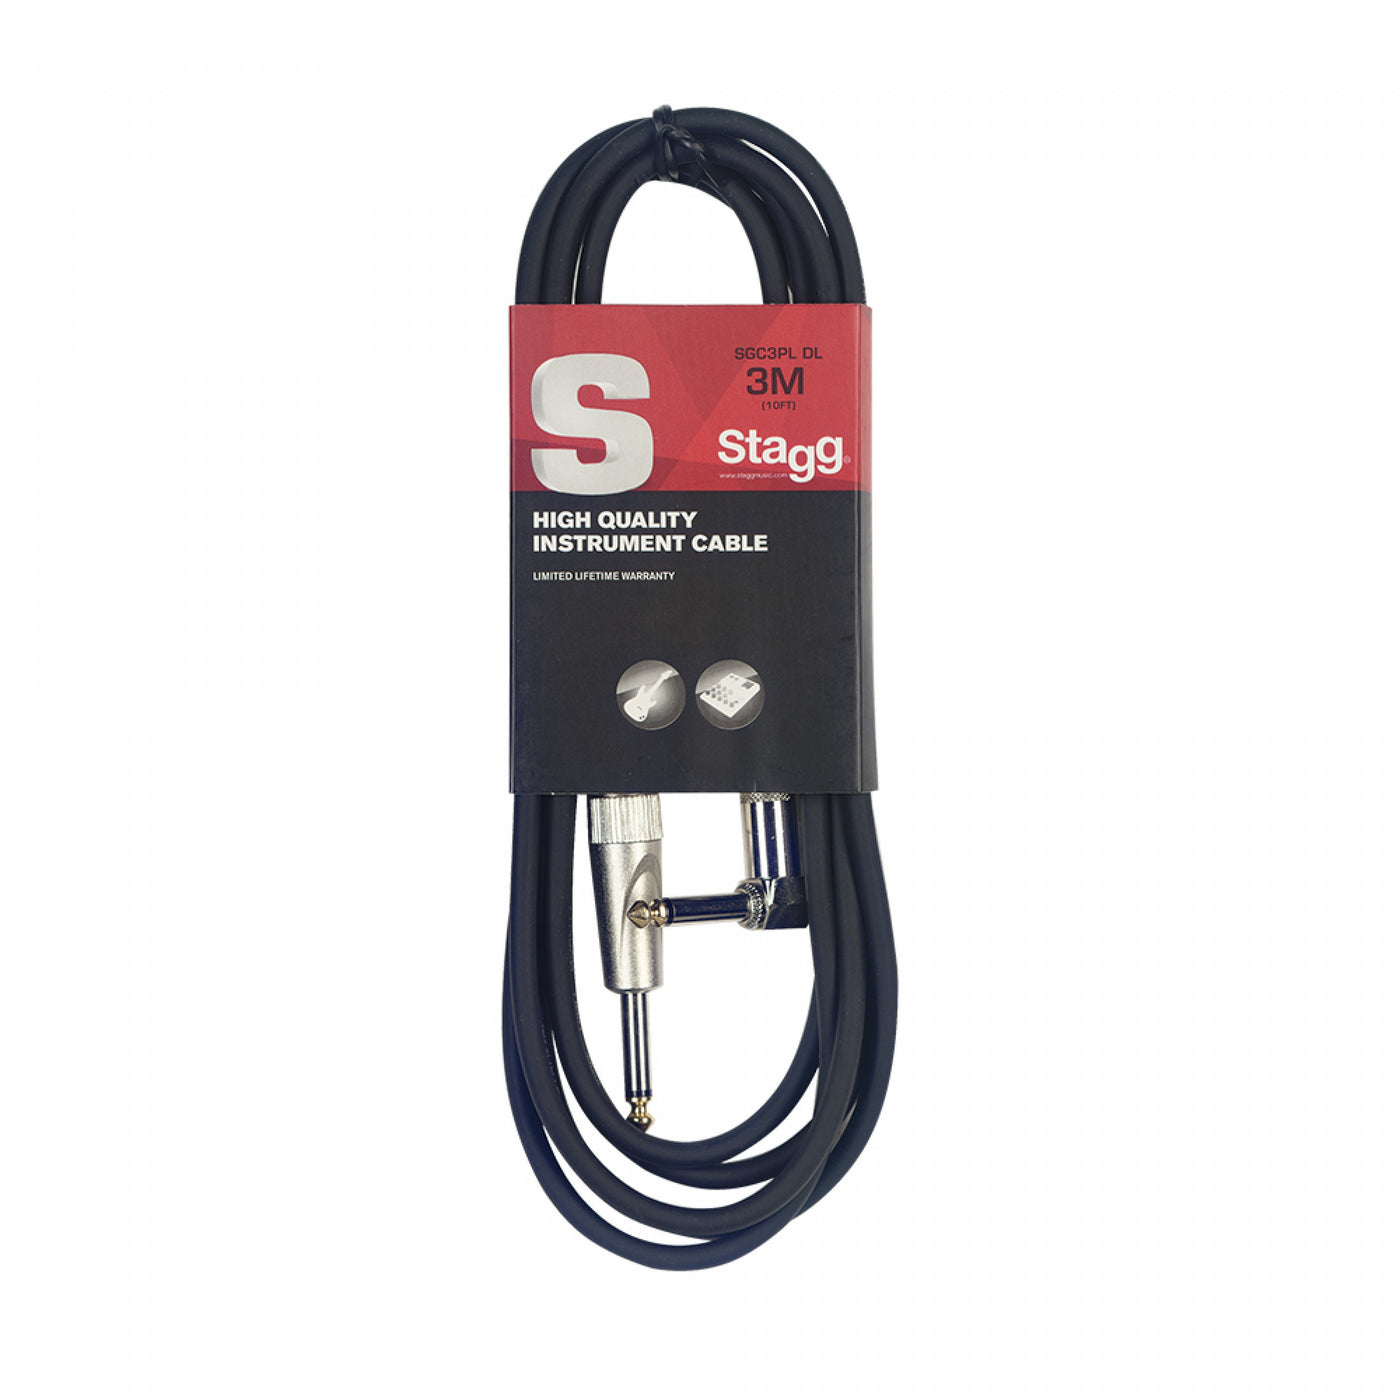 SGC3PL DL - 3 Metre Cable Right Angle